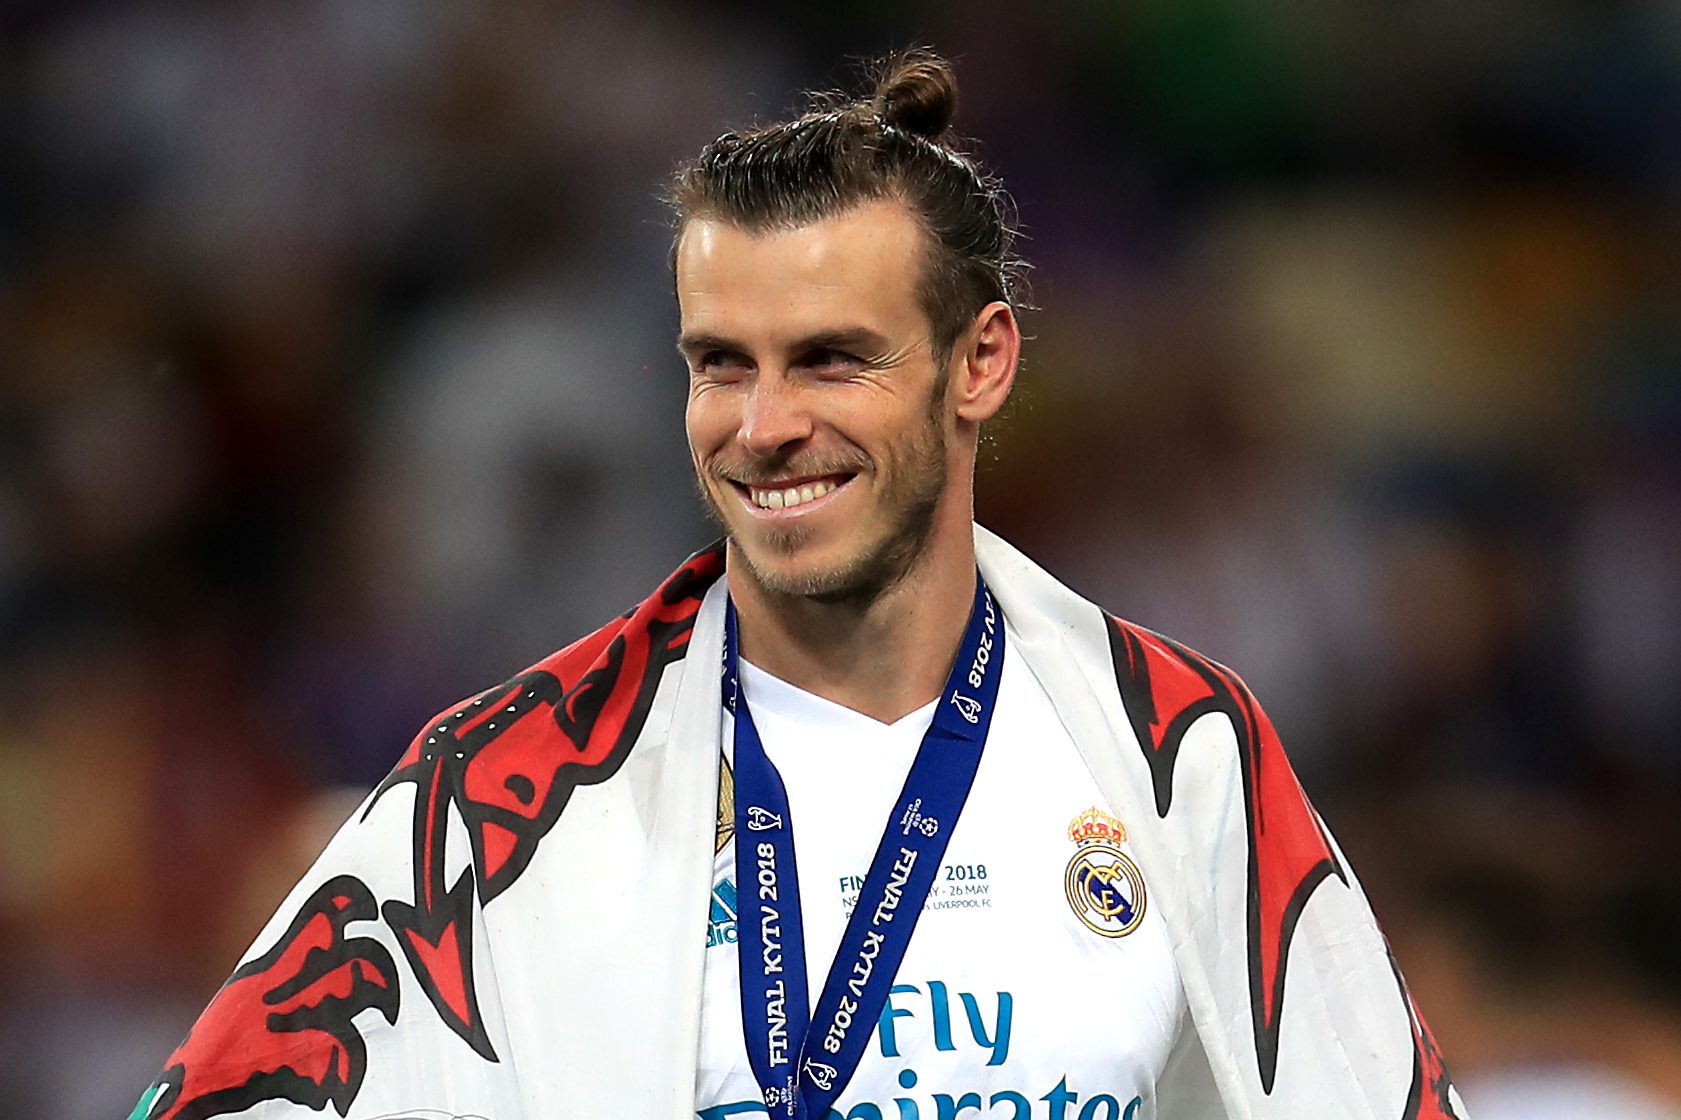 Lawrie: My first meeting with Gareth Bale brought a lot of laughter